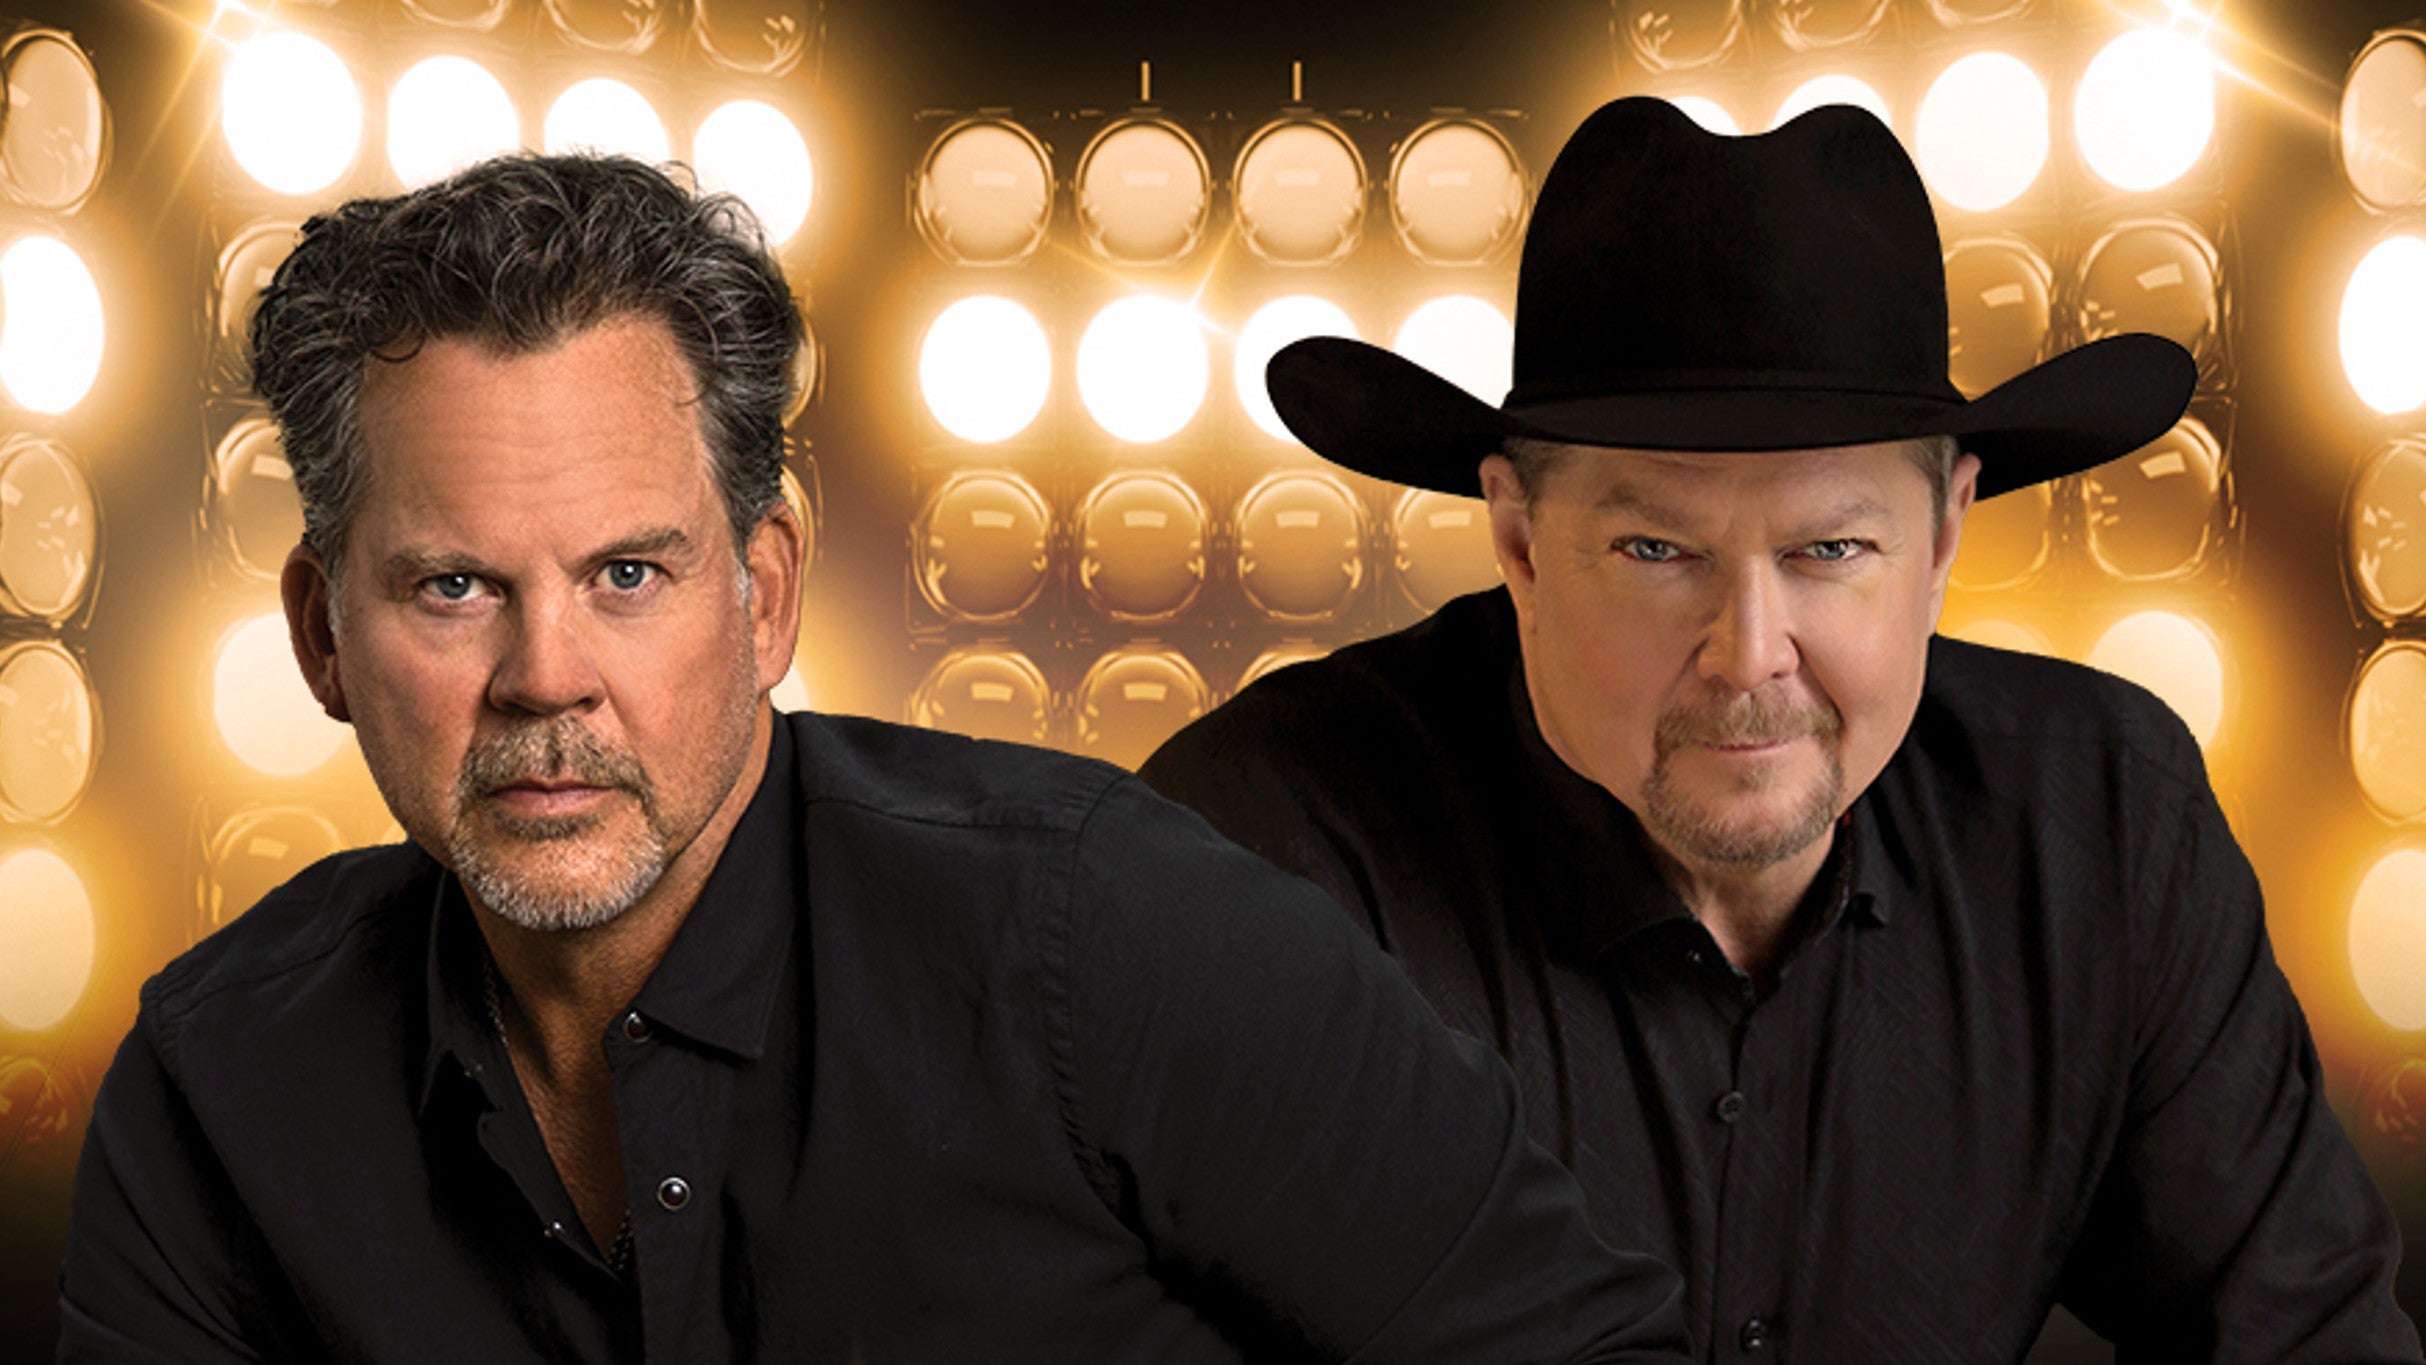 WiseGuys Presale Passwords Gary Allan and Tracy Lawrences event in